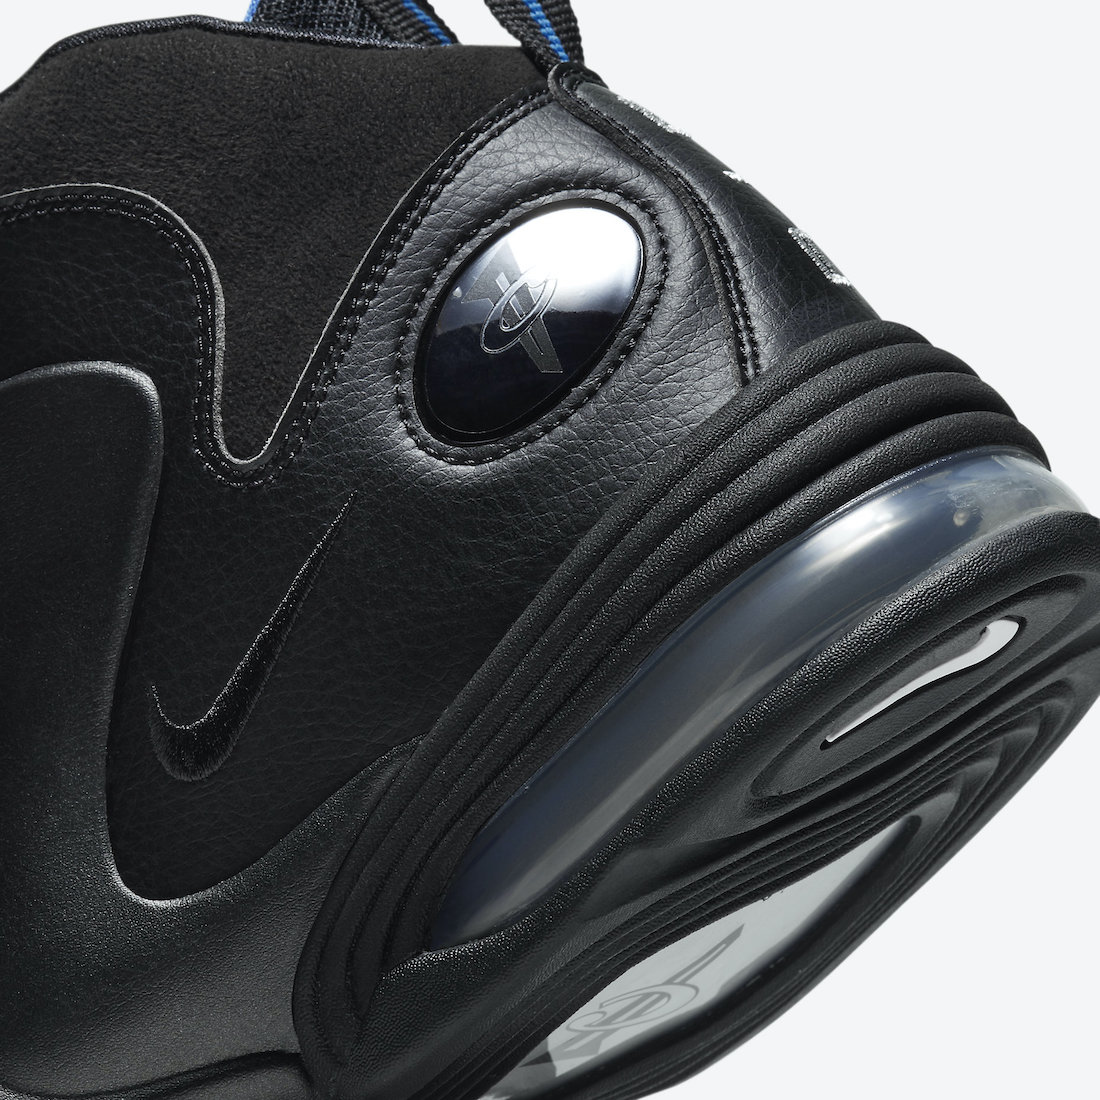 Nike Air Penny 3 Black Royal CT2809-001 Release Date Price